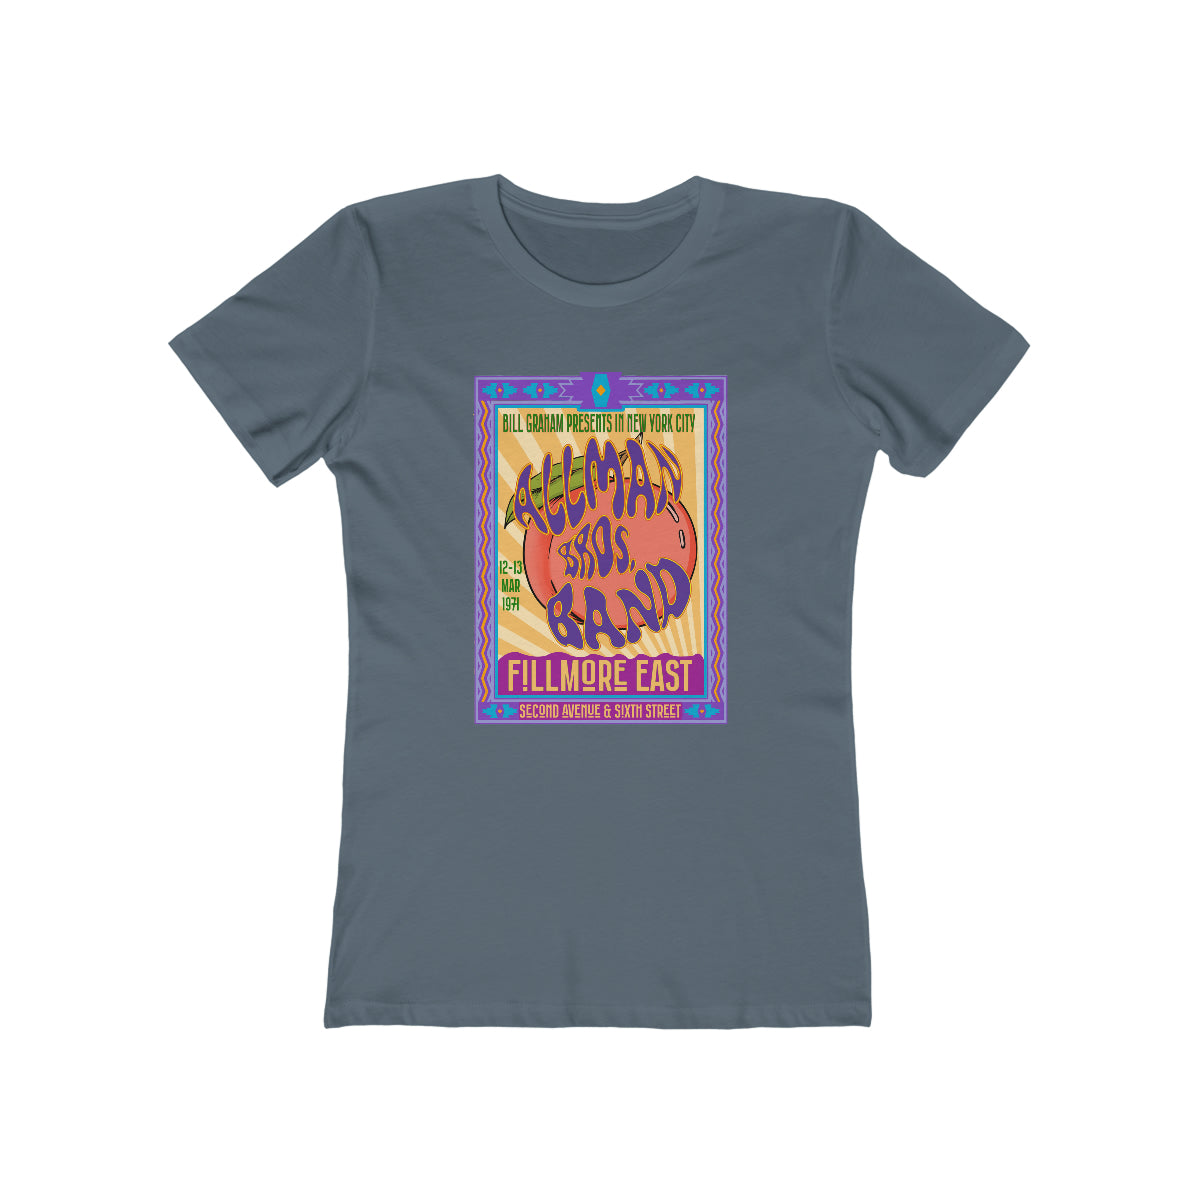 Allman Brothers at the Fillmore East - Women's T-Shirt